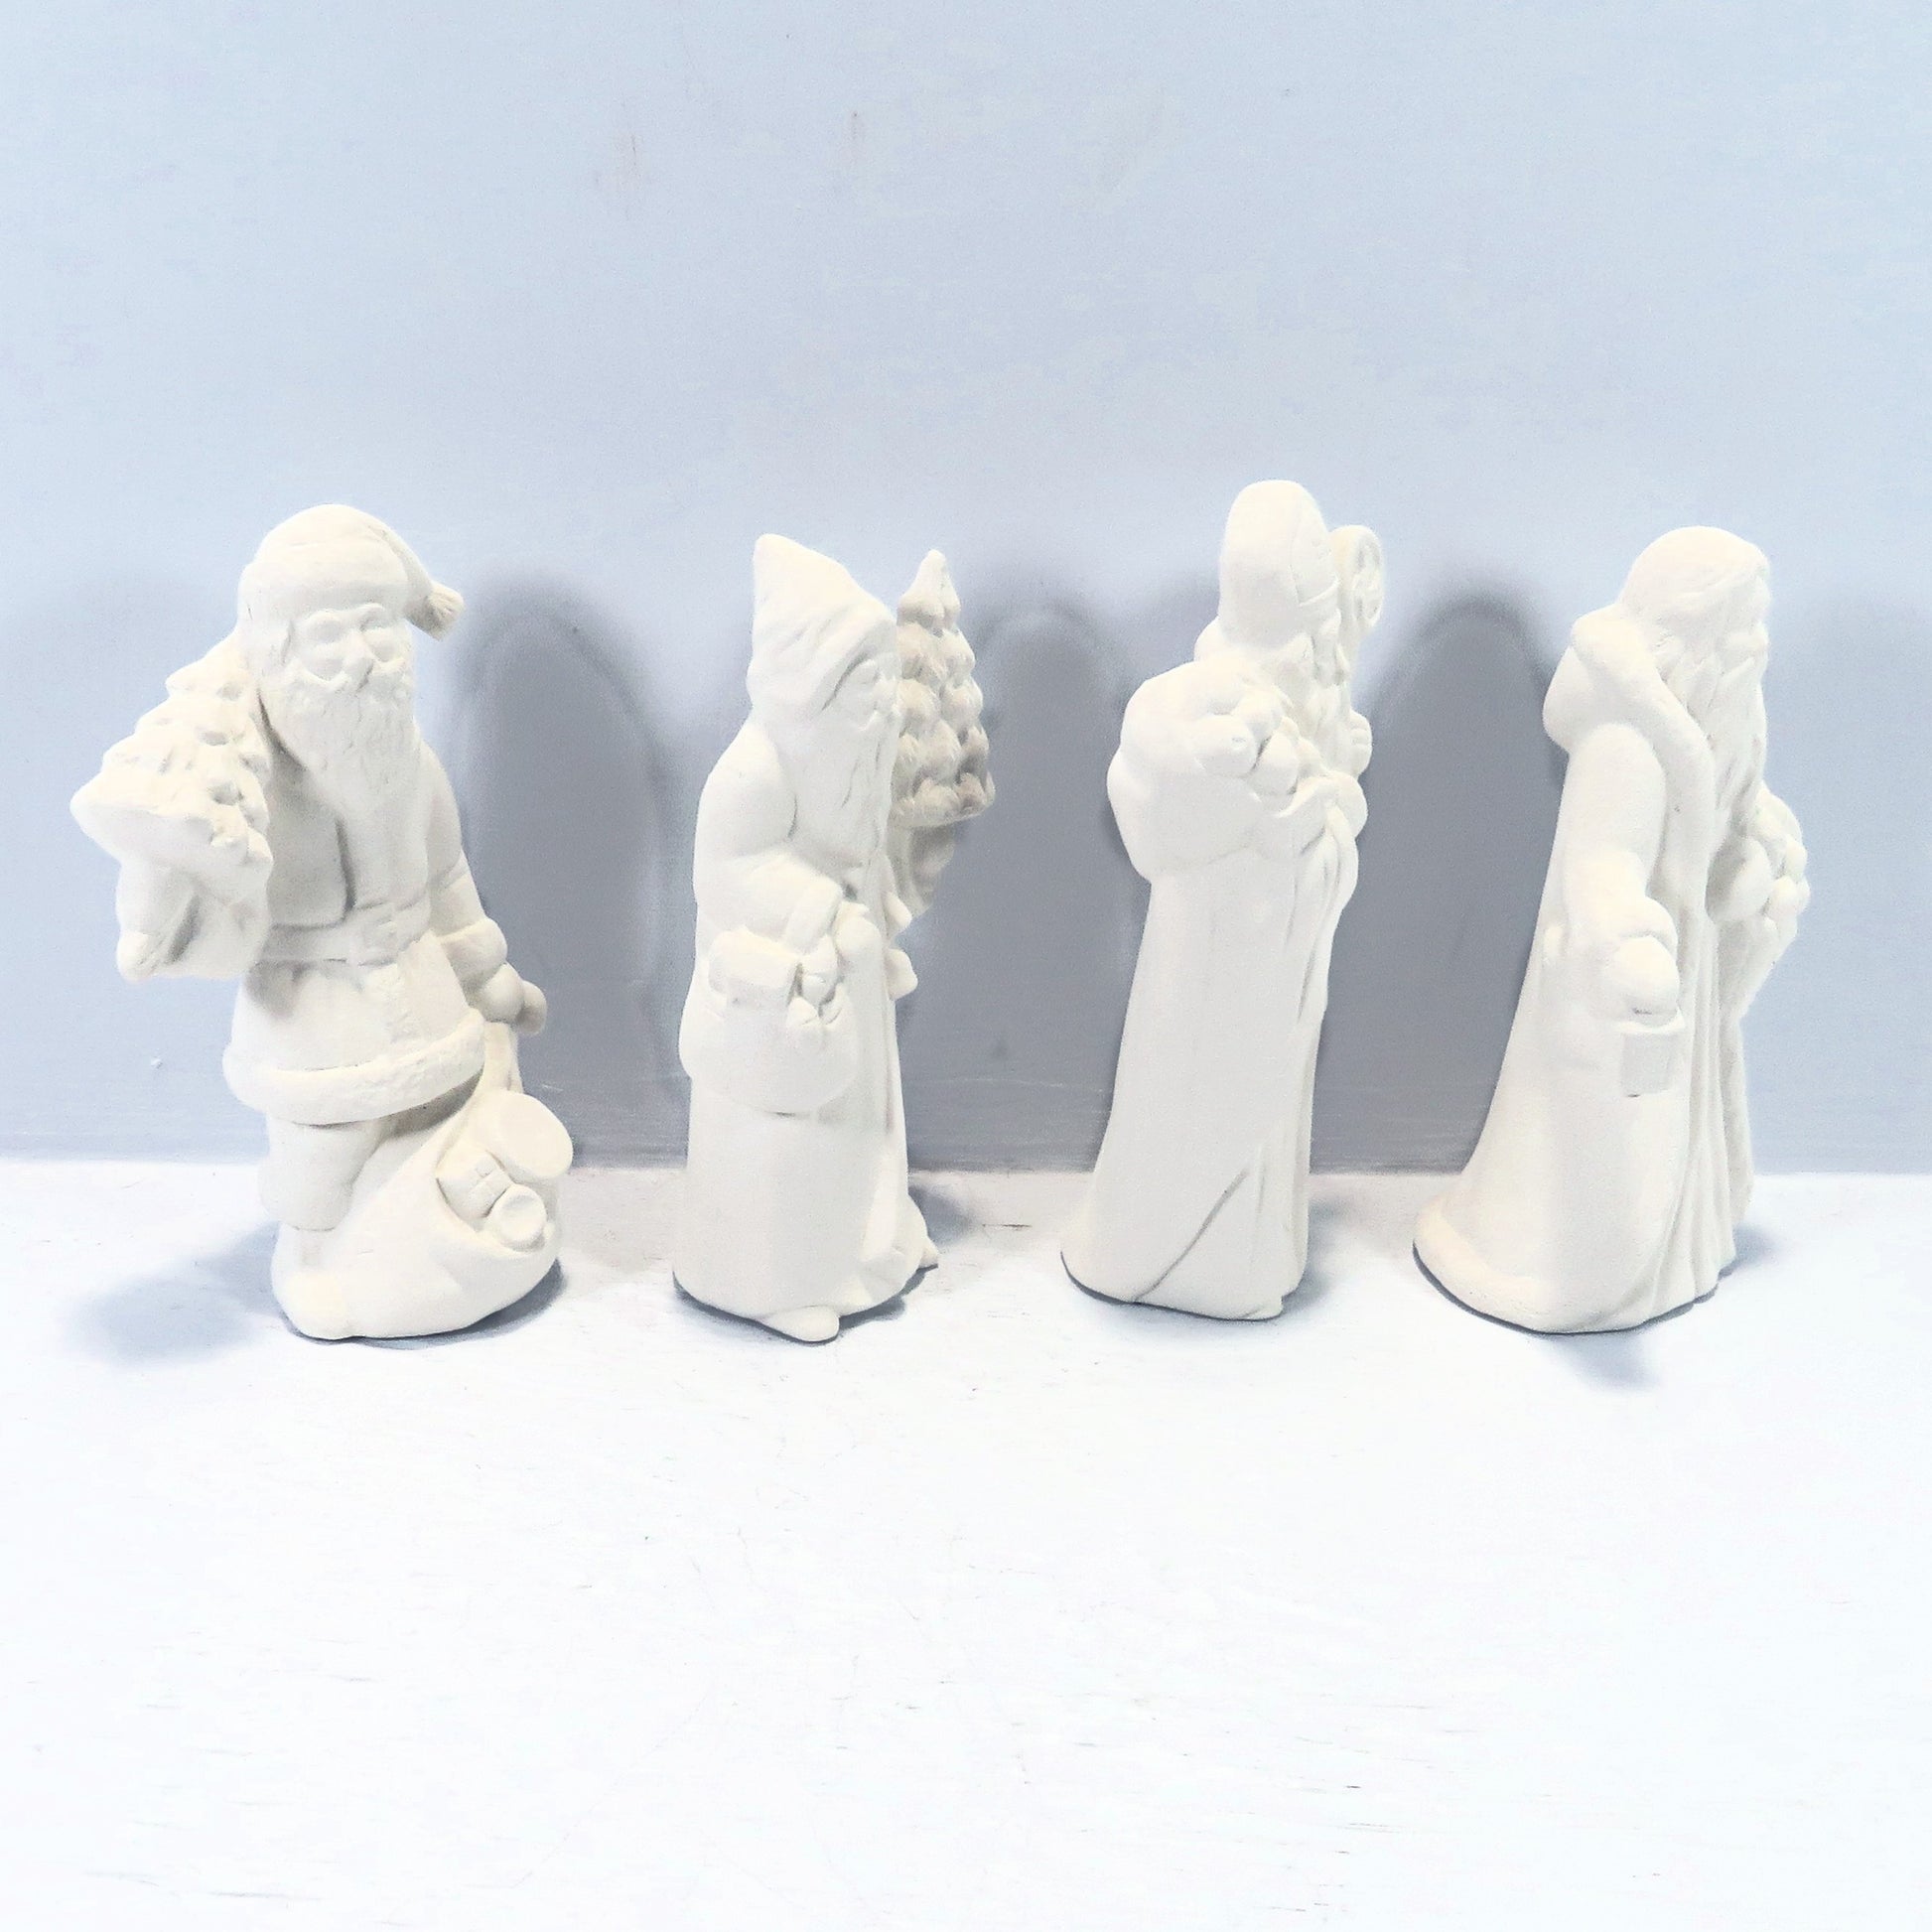 Side vview of set of 4 santa statues looking to the right